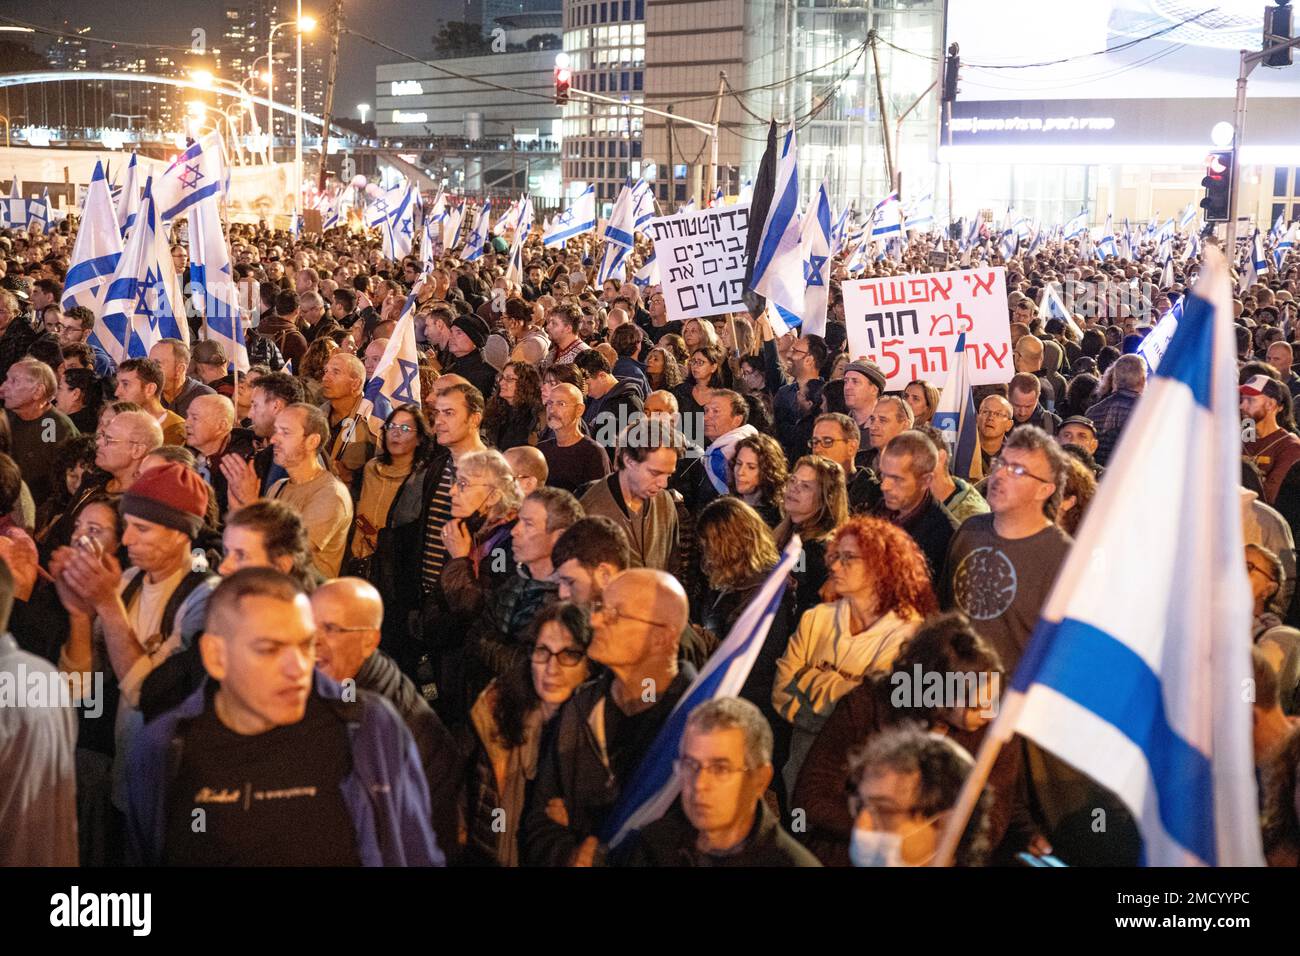 Israel. 21st Jan, 2023. Over 100,000 people protested in Kaplan junction, the signboards staiting “you can't erase the infamy”, “In dictatorship criminals nominates the judges”. Over 100,000 people protested in Tel Aviv against Netanyahu's far-right government and judicial overhaul. Jan 22th 2023. (Photo by Matan Golan/Sipa USA). Credit: Sipa USA/Alamy Live News Stock Photo